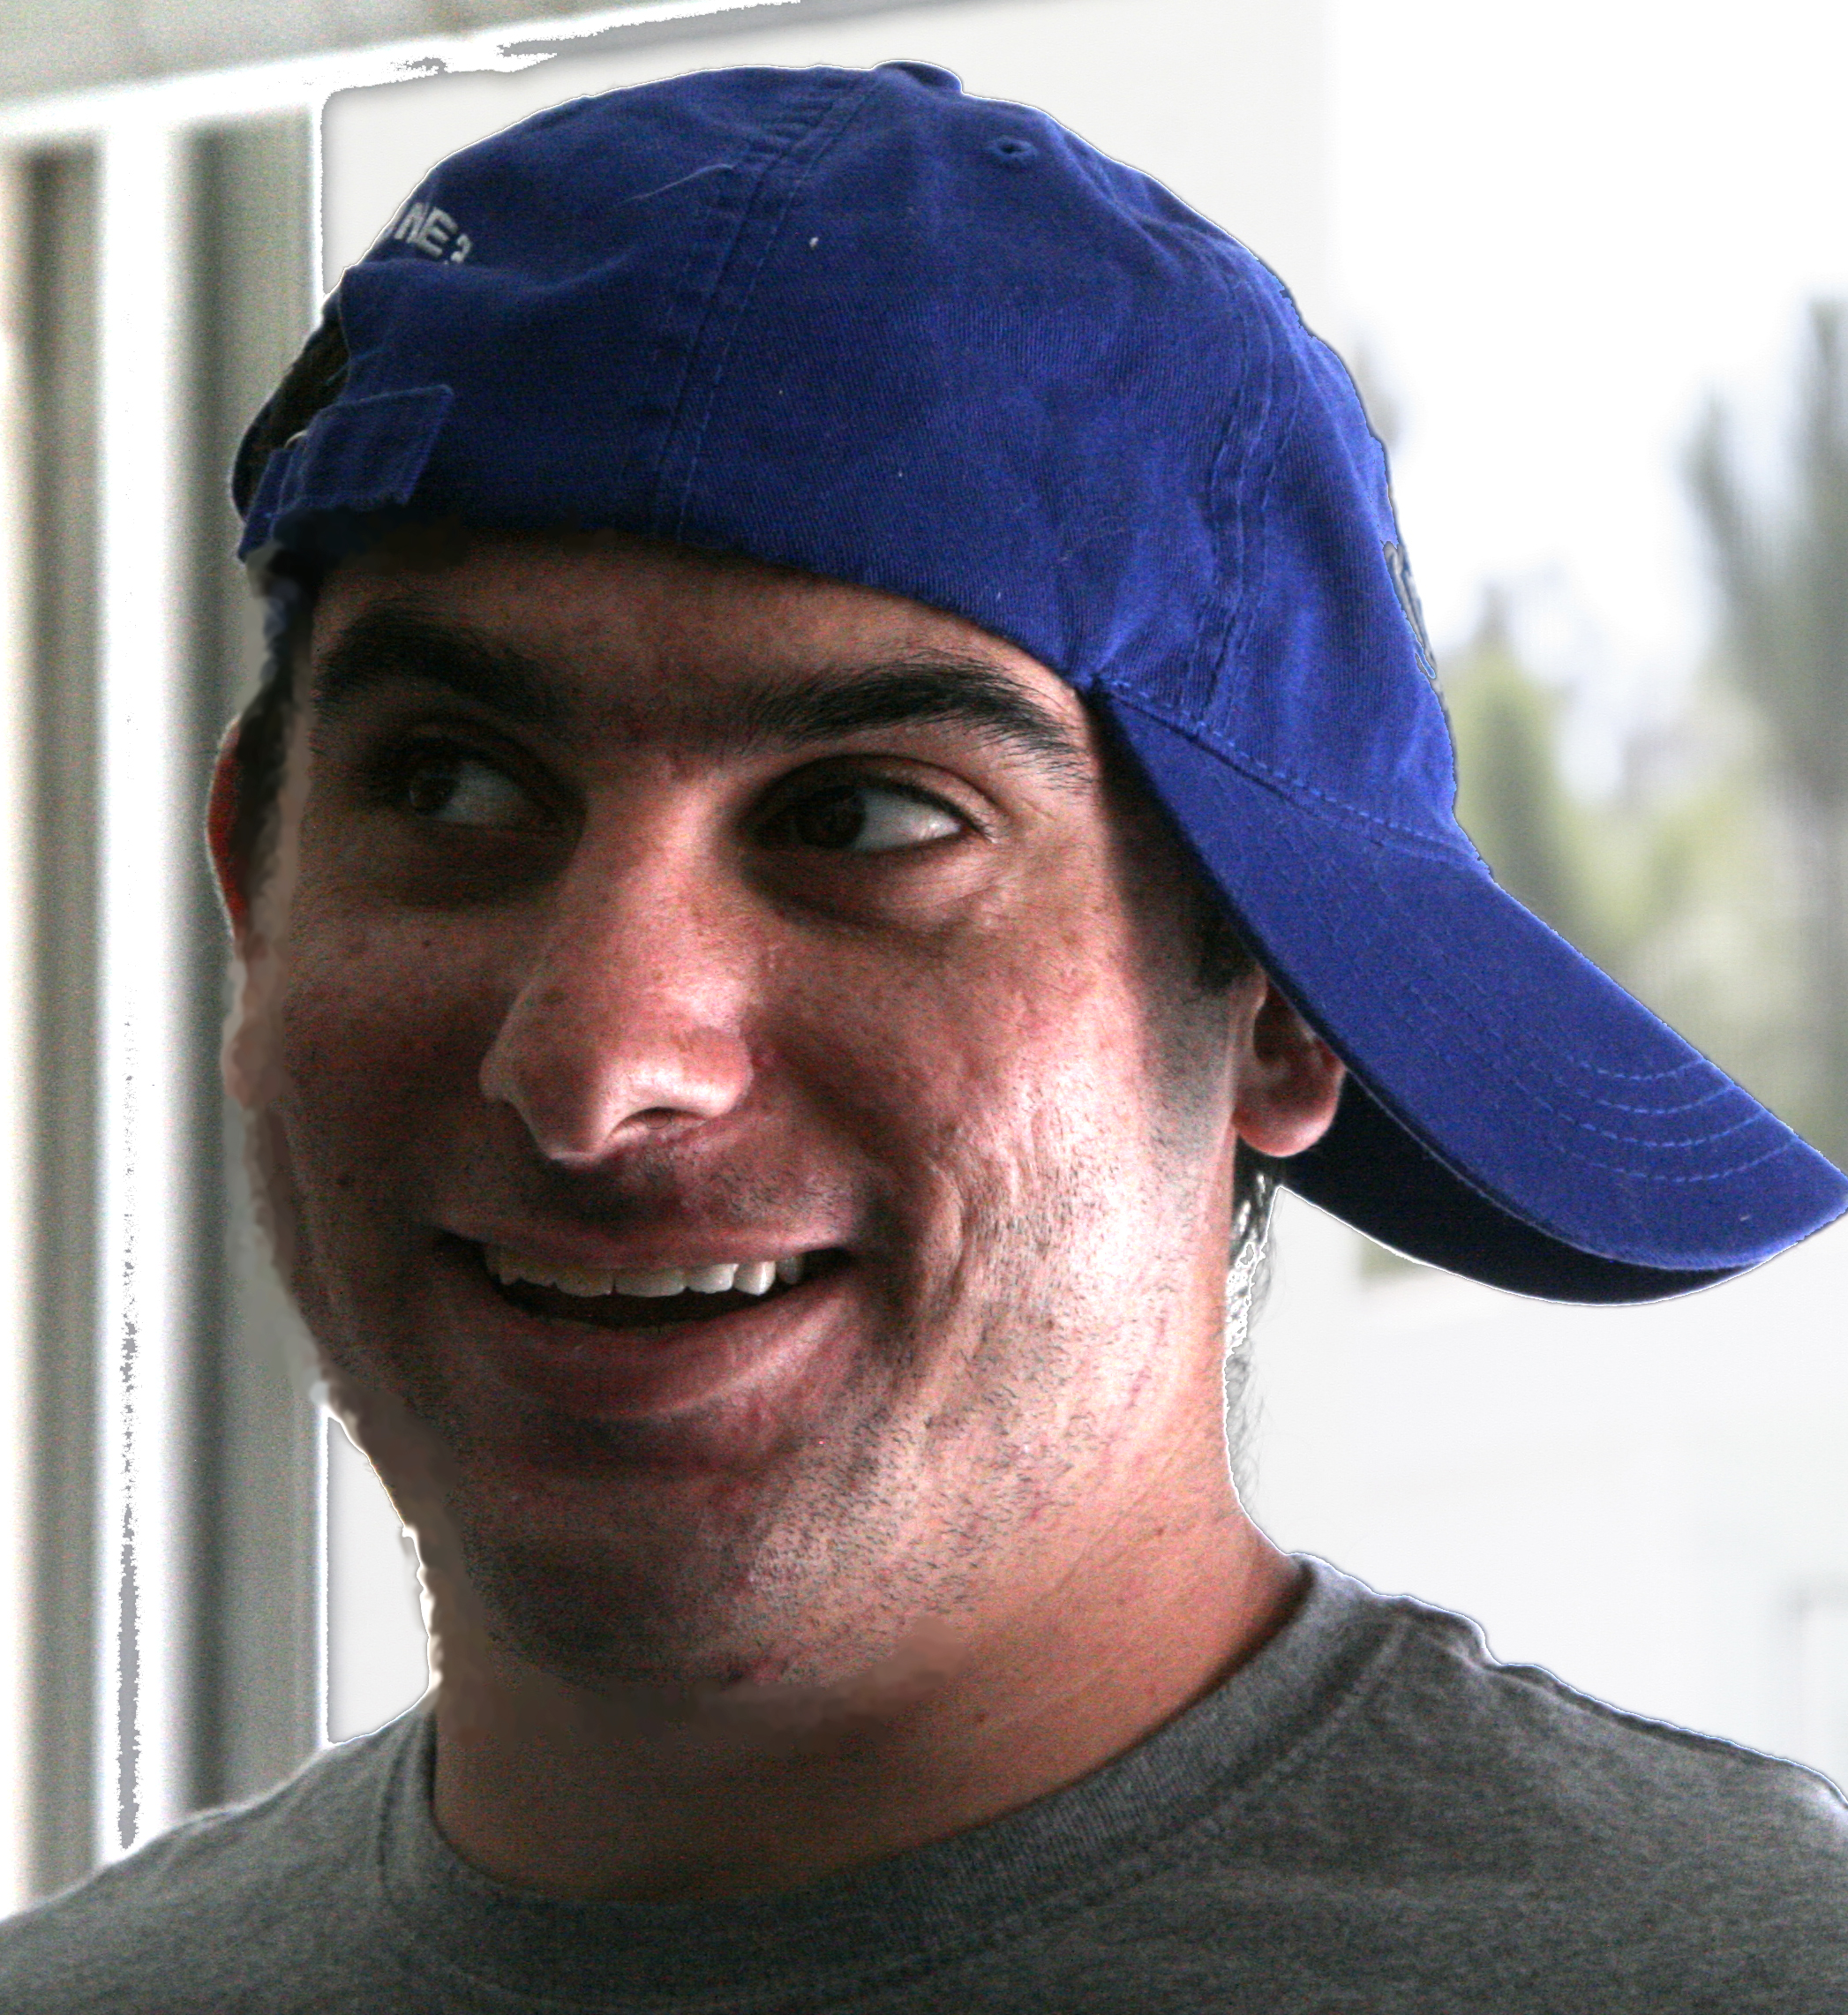 Picture of Jared taken September 2007 during a birthday party.  Jared's wearing a blue hat.